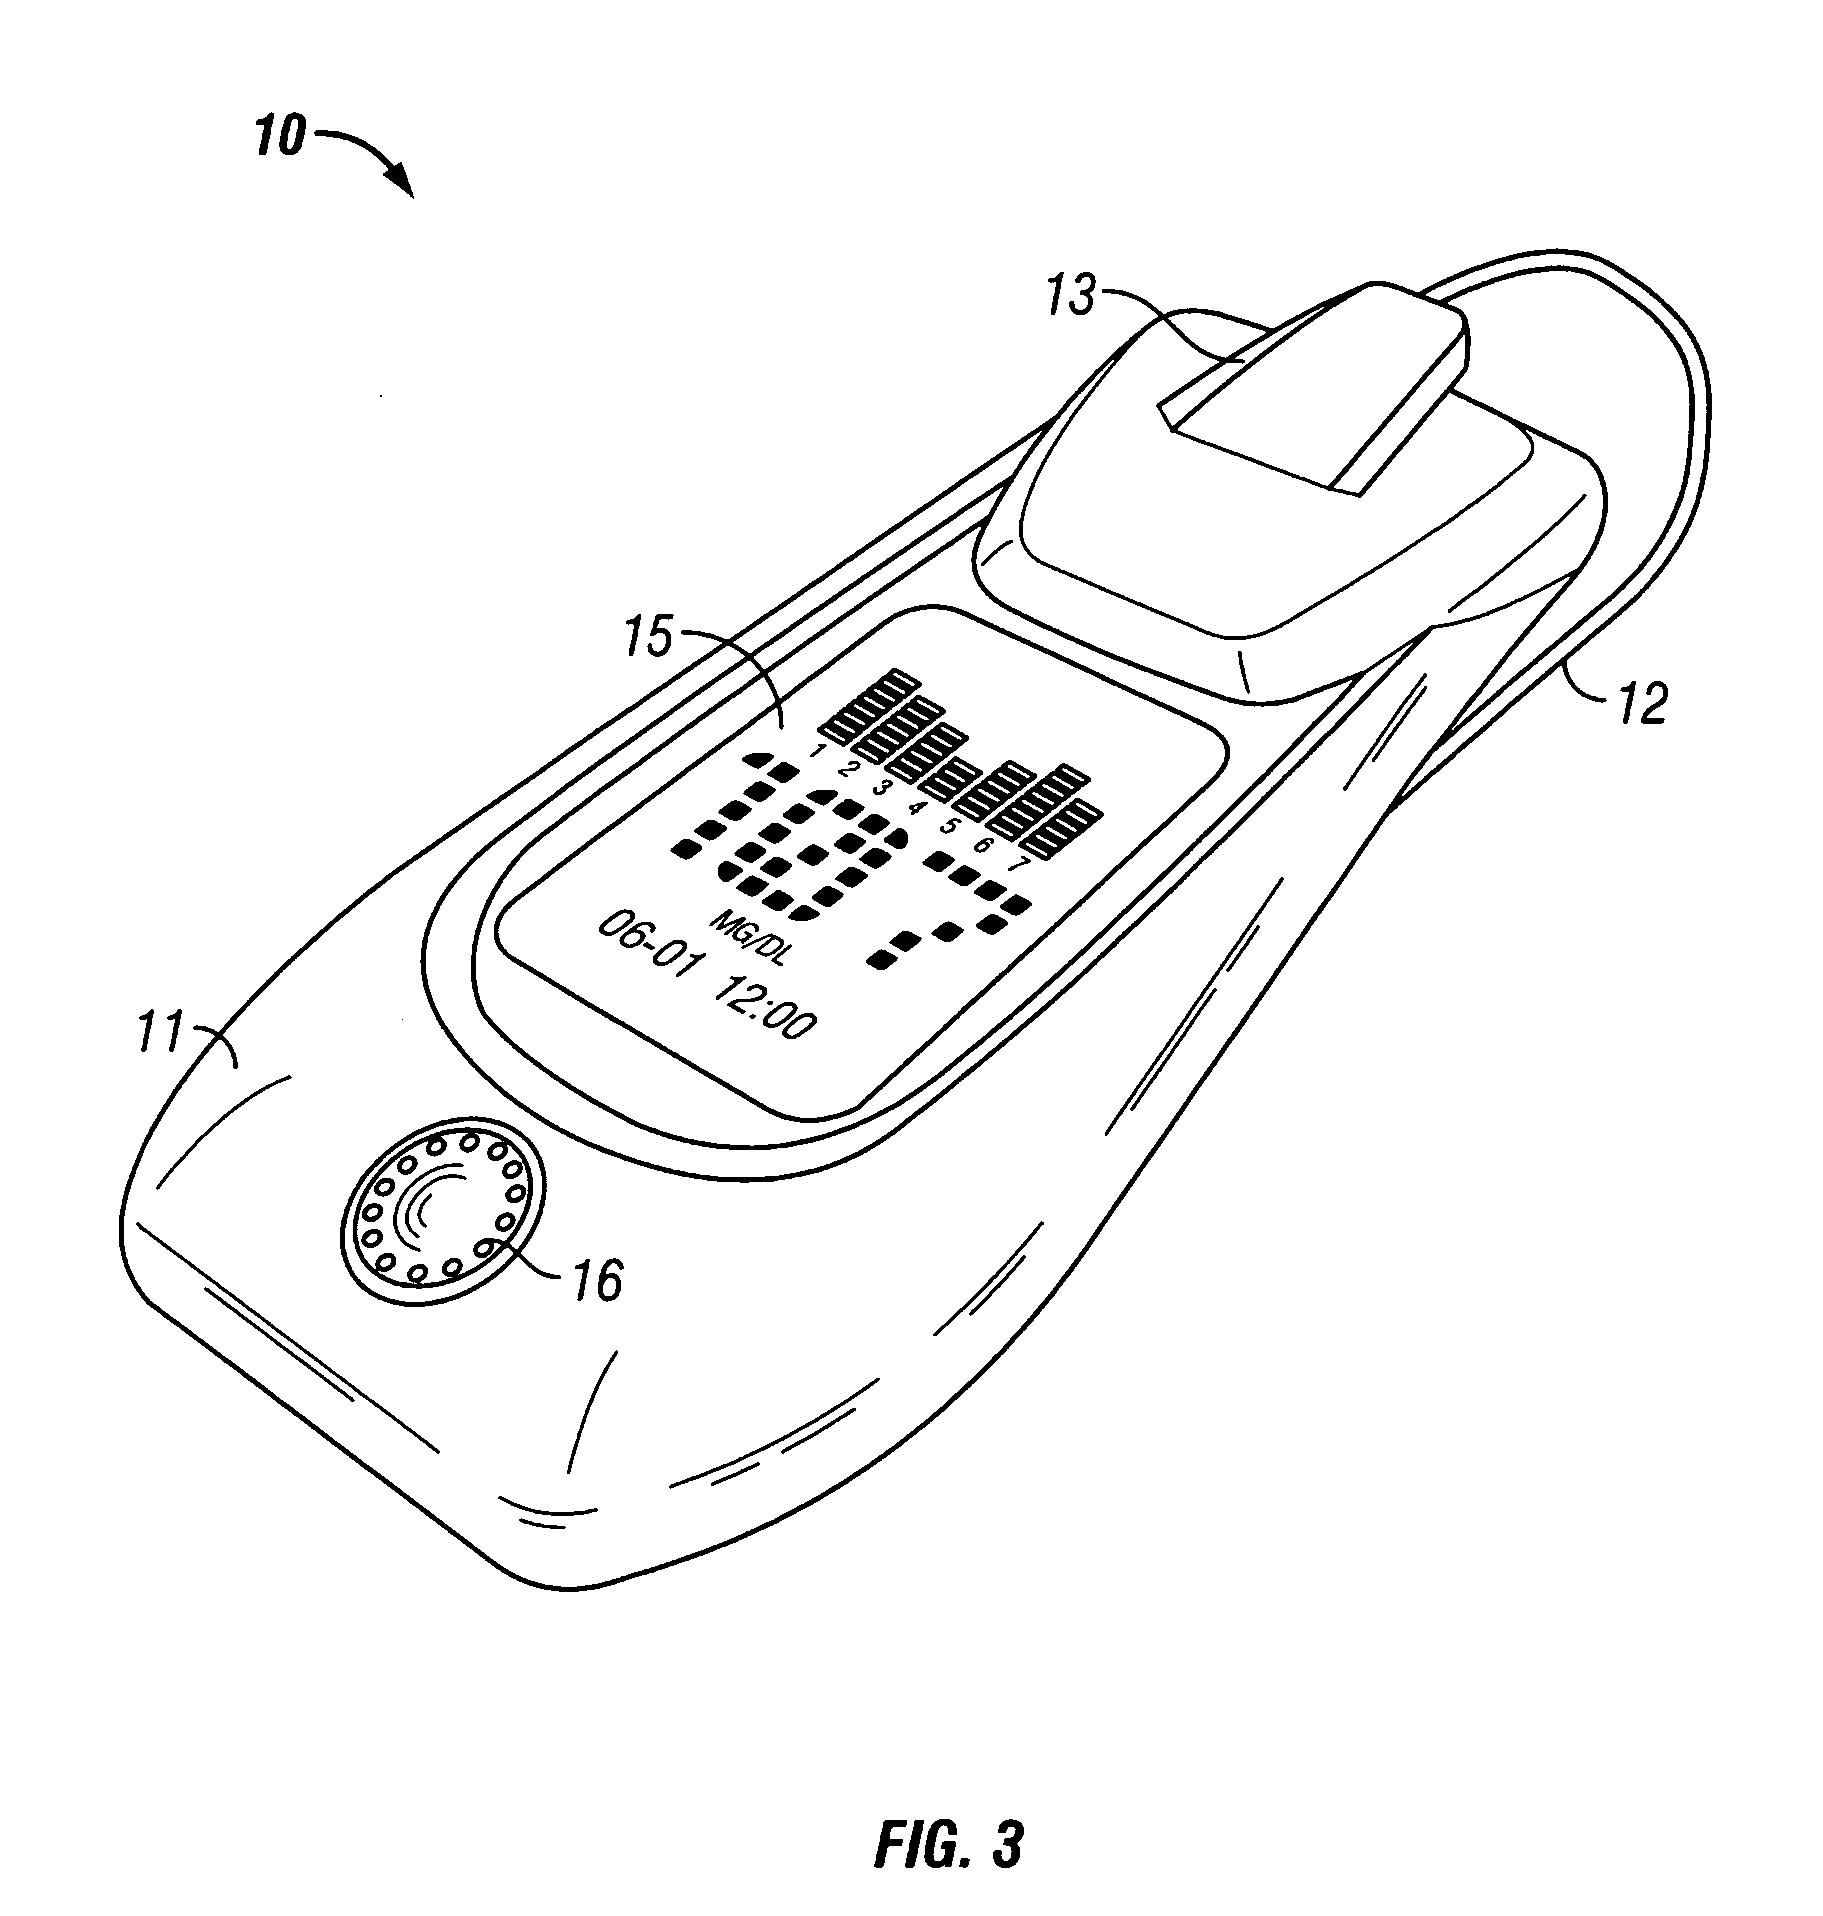 Method and apparatus for presentation of noninvasive glucose concentration information